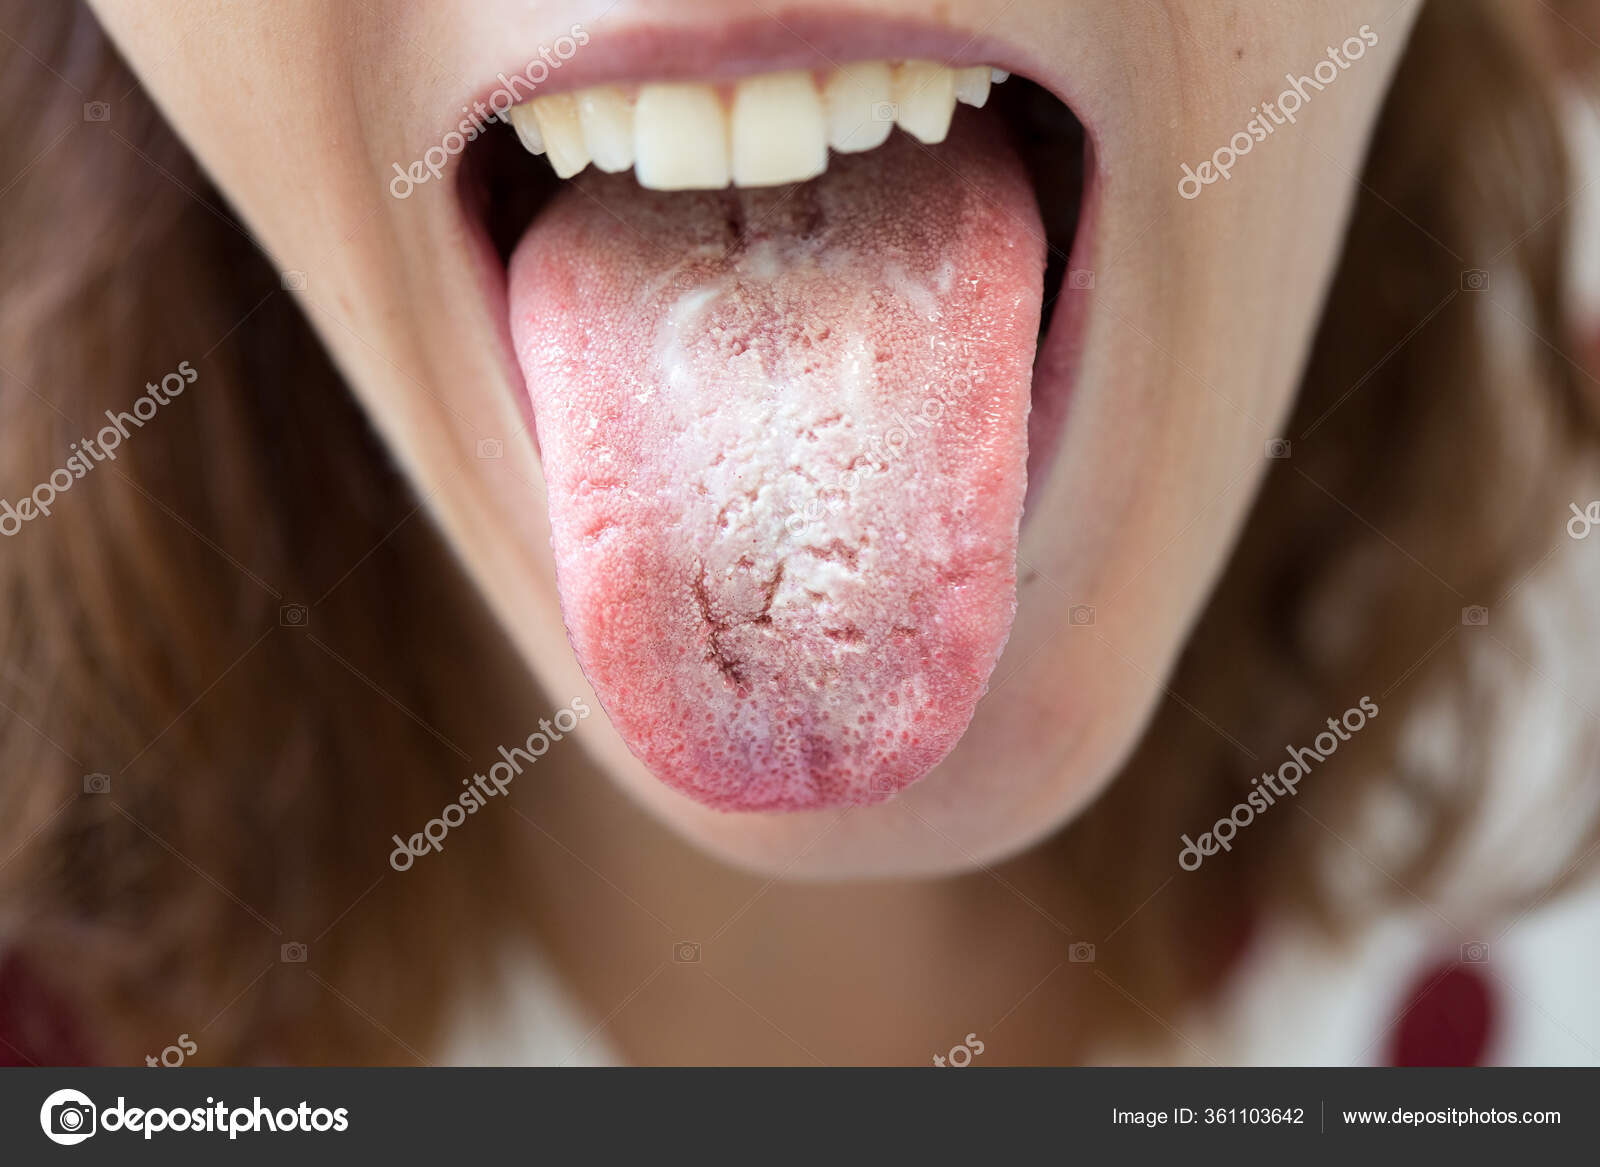 Girls Spitting Mouth